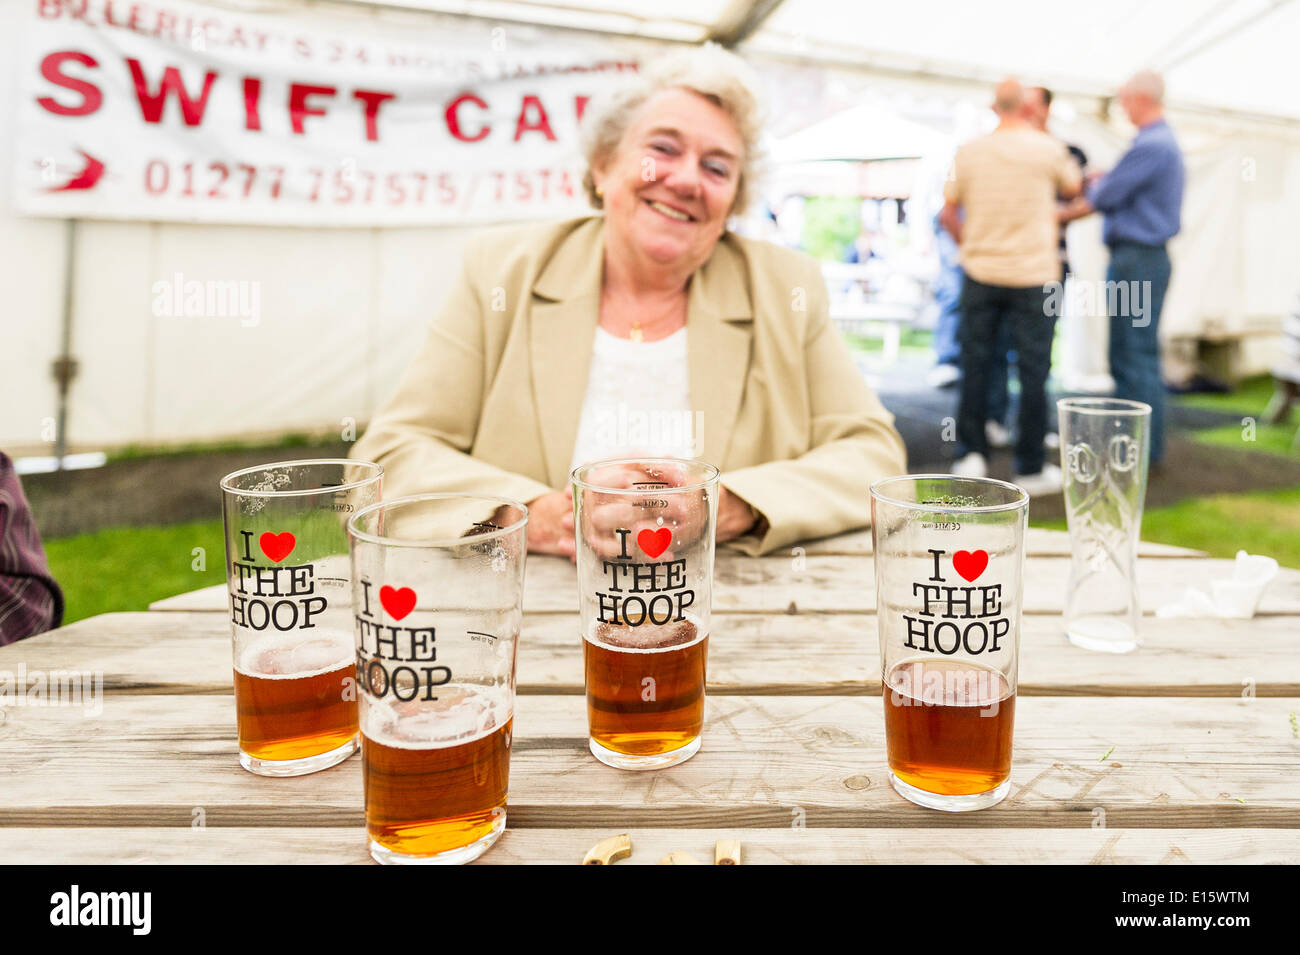 Stock, Essex. 23rd May, 2014.  Pat Crosby from Billericay is a real ale fan and is a regular visitor on the opening day of THE HOOP BEER FESTIVAL, Essex's most famous pub beer festival.  Over the past twenty years, the Hoop beer festival in Stock Village has become an annual event, drawing serious beer supping folk. Photographer: Gordon Scammell/Alamy Live News Stock Photo